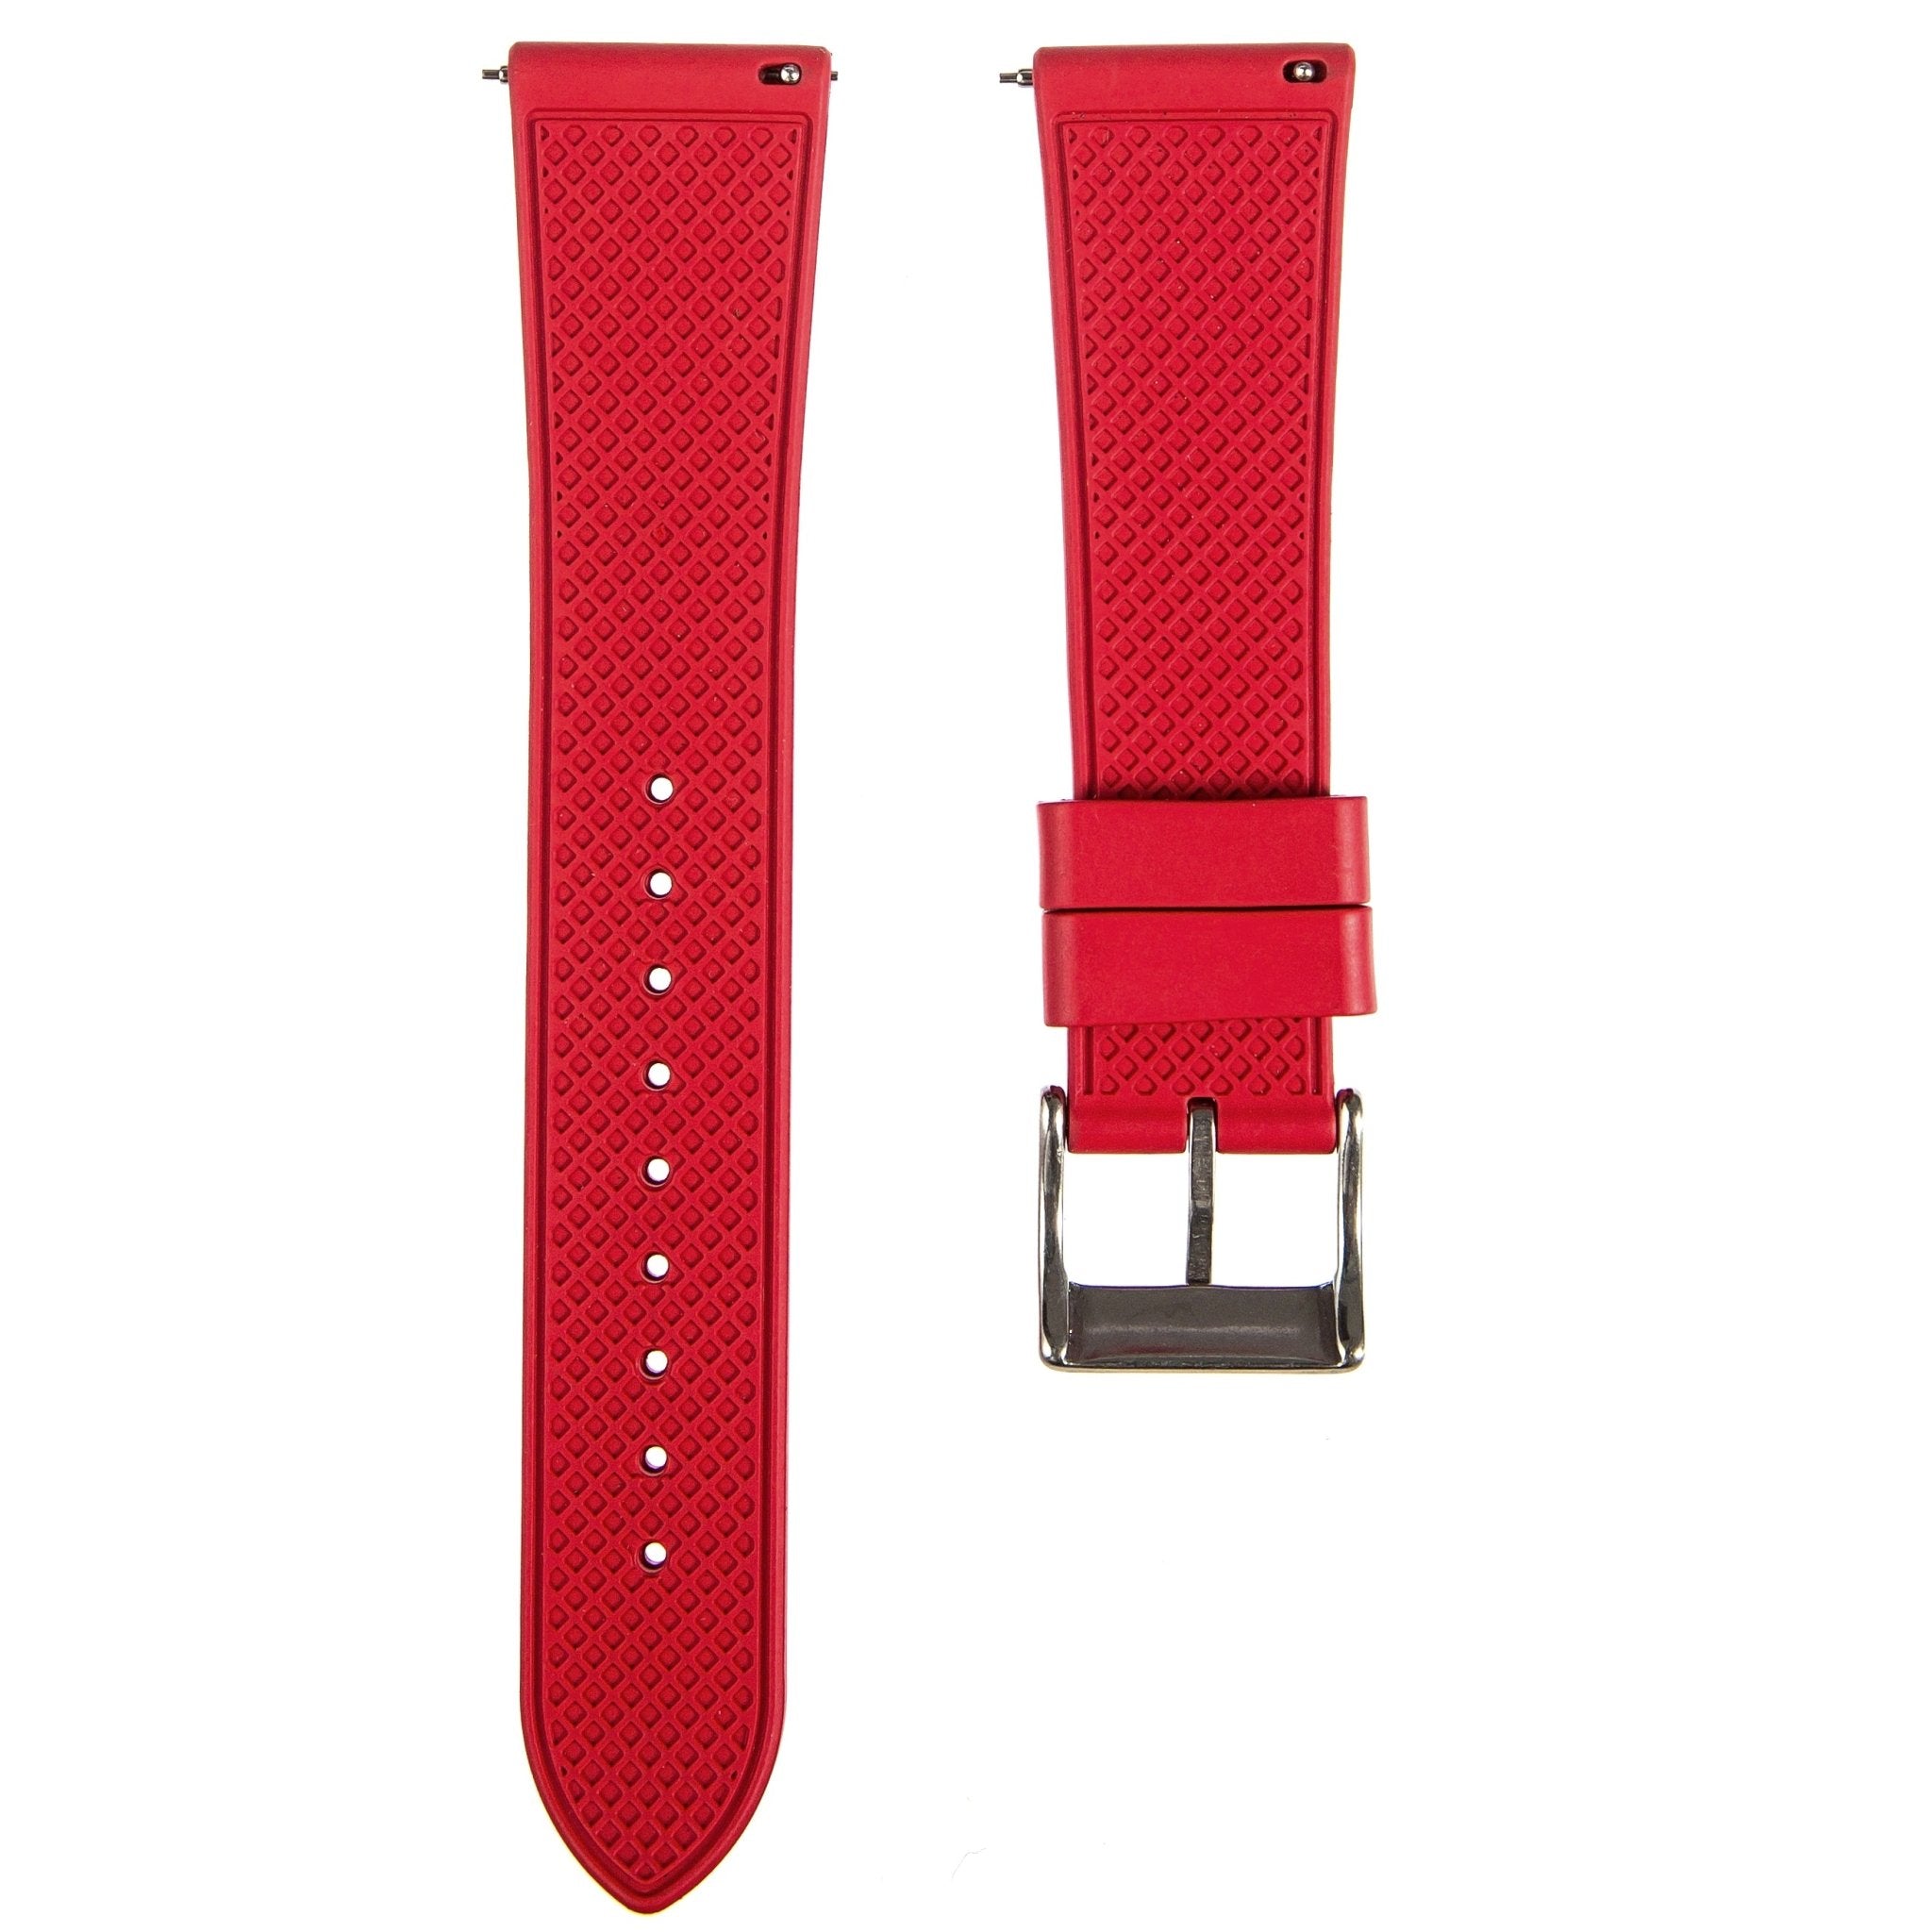 Grid FKM Rubber Strap - Quick-Release - Compatible with Blancpain x Swatch - Bright Red (2412) -StrapSeeker